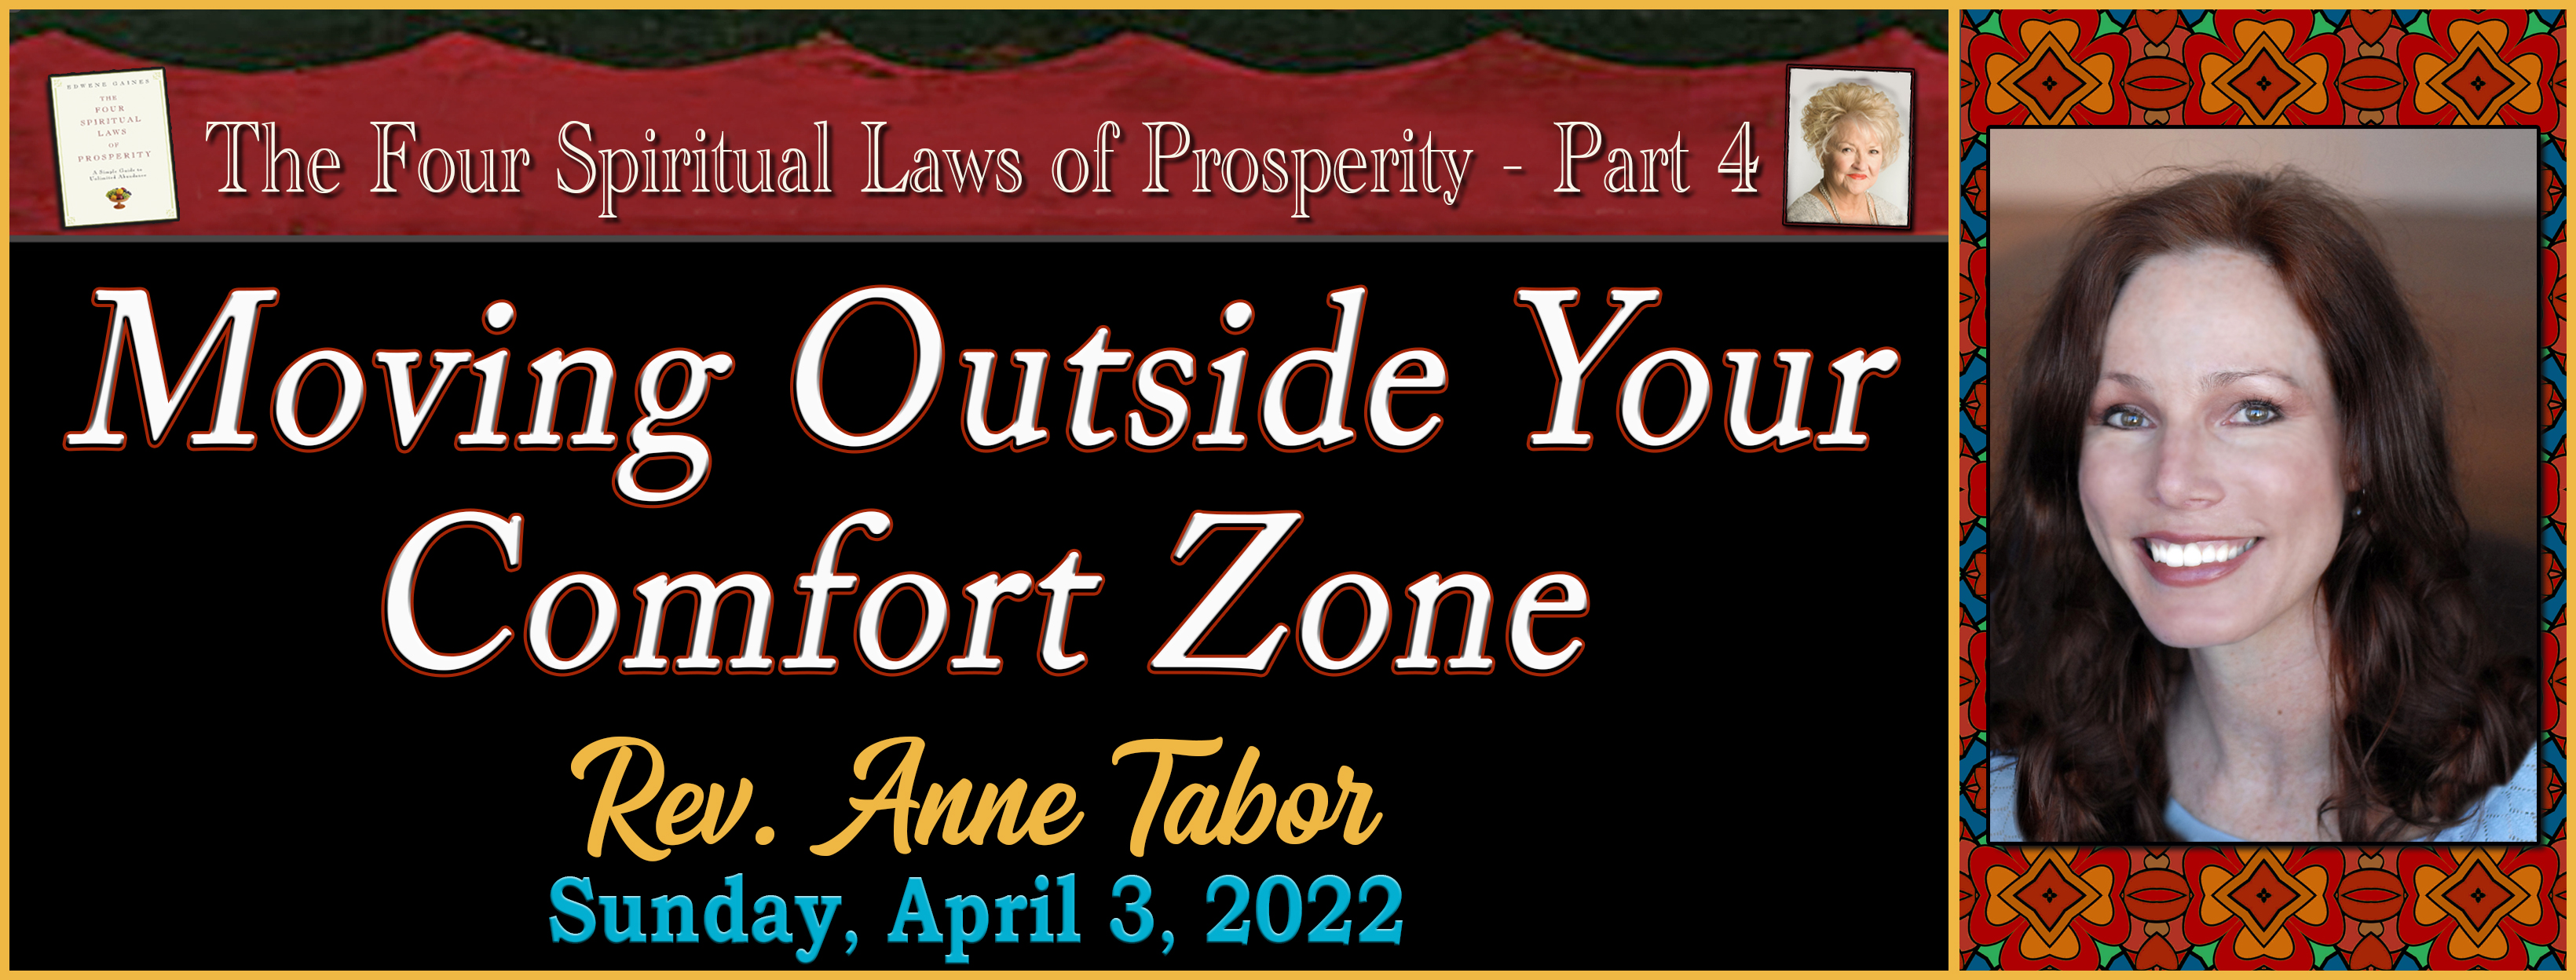 04-03-2022 Moving Outside Your Comfort Zone // Rev. Anne Tabor